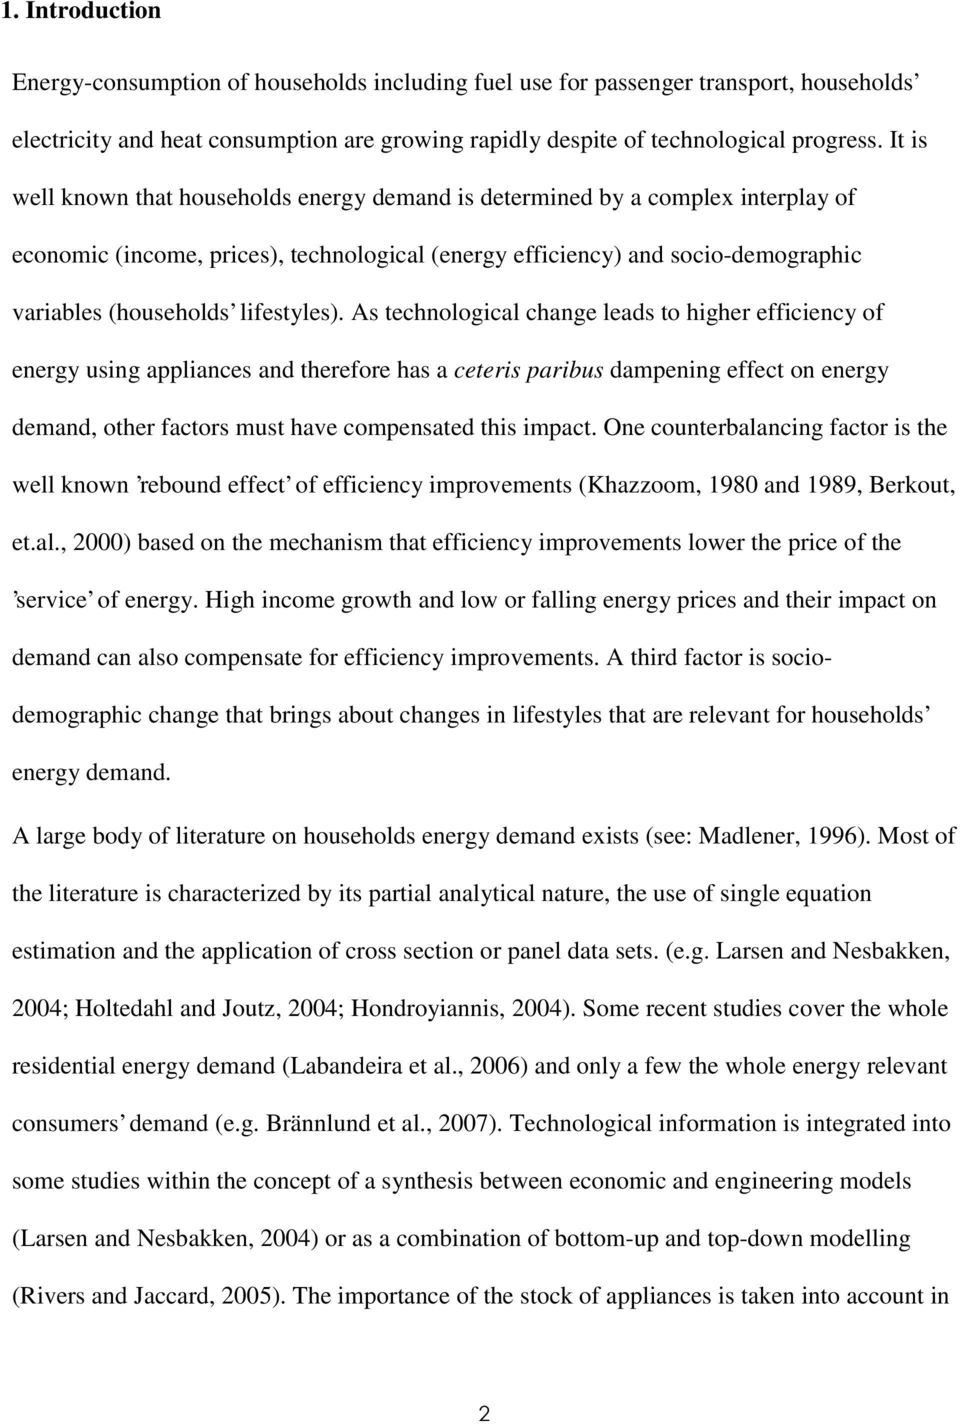 As technologcal change leads to hgher effcency of energy usng applances and therefore has a ceters parbus dampenng effect on energy demand, other factors must have compensated ths mpact.